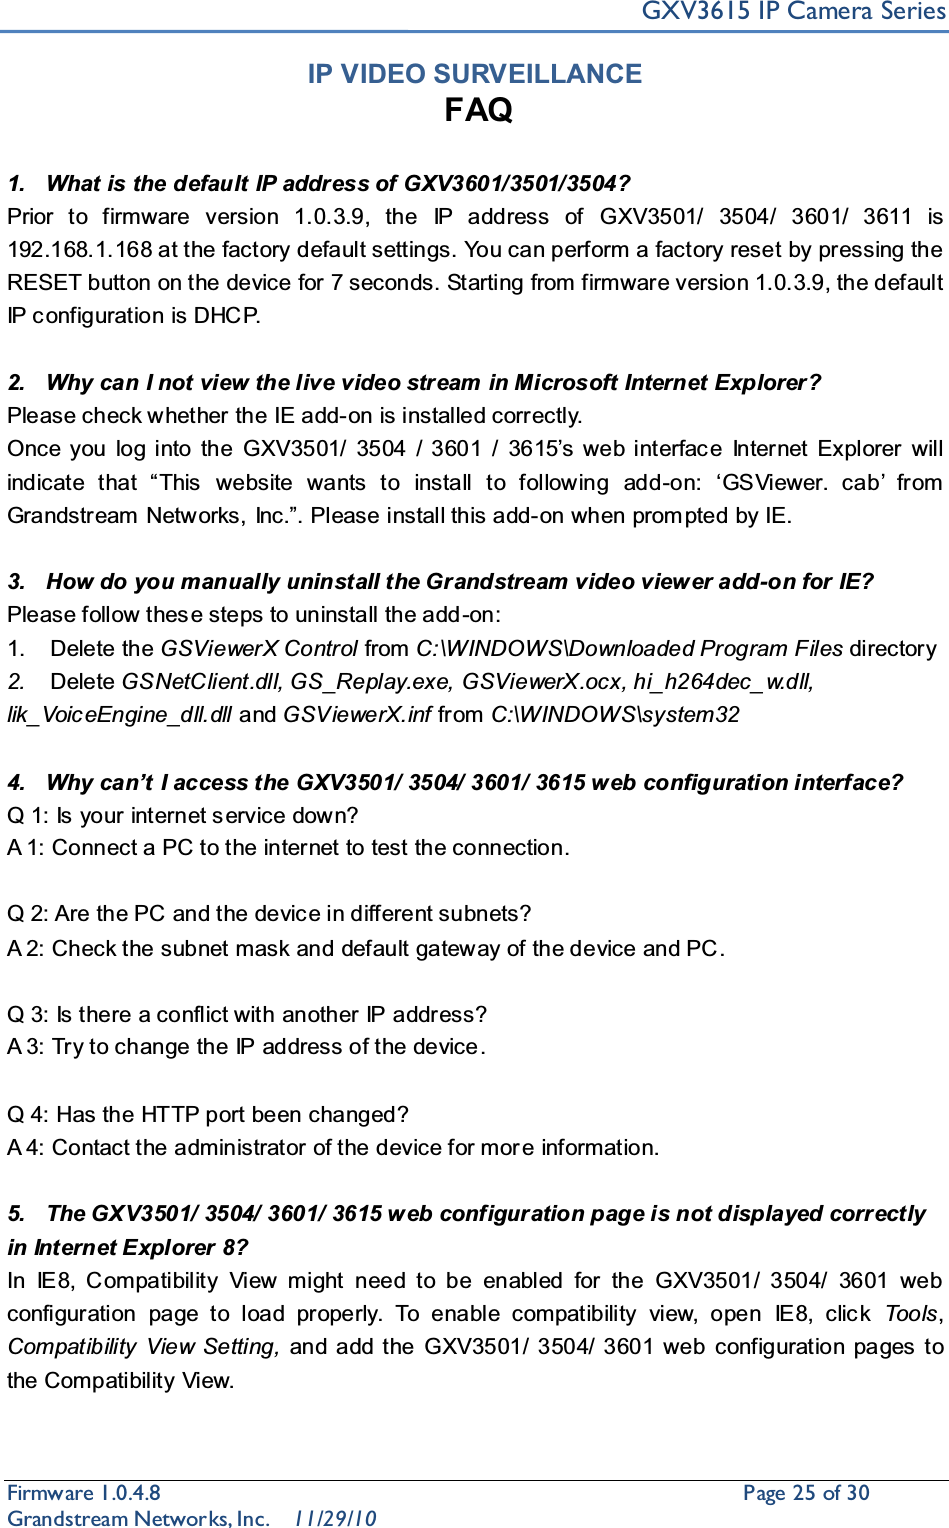 GXV3615 IP Camera SeriesFirmware 1.0.4.8                                                  Page25of 30    Grandstream Networks, Inc. 11/29/10IP VIDEO SURVEILLANCEFAQ1. What is the default IP address of GXV3601/3501/3504?Prior to firmware version 1.0.3.9, the IP address of GXV3501/ 3504/ 3601/ 3611 is  192.168.1.168 at the factory default settings. You can perform a factory reset by pressing the RESET button on the device for 7 seconds. Starting from firmware version 1.0.3.9, the default IP c onfiguration is DHCP.2. Why can I not view the live video stream in Microsoft Internet Explorer?Please check whether the IE add-on is installed correctly. Once you log into the GXV3501/ 3504 / 3601 / 3615¶V ZHE LQWHUIDF H ,QWHUQHW ([SORUHU ZLOOLQGLFDWH WKDW ³7KLV  ZHEVLWH ZDQWV WR LQVWDOO WR IROORZLQJ DGG-RQ µ*69LHZHU FDE¶ IURPGrandstream 1HWZRUNV,QF´3OHDVHLQVWDOOWKLVDGG-on when prom pted by IE.3. How do you manually uninstall the Grandstream video viewer add-on for IE? Please follow thes e steps to uninstall the add -on: 1. Delete the GSViewerX Control from C:\WINDOWS\Downloaded Program Files directory 2. Delete GSNetClient.dll, GS_Replay.exe, GSViewerX.ocx, hi_h264dec_ w.dll, lik_Voic eEngine_dll.dll and GSViewerX.inf from C:\WINDOWS\system324. :K\FDQ¶W,access the GXV3501/ 3504/ 3601/ 3615 w eb configuration interface? Q 1: Is your internet service down? A 1: Connect a PC to the internet to test the connection.Q 2: Are the PC and the devic e in different subnets? A 2: Check the subnet mask and default gateway of the device and PC .Q 3: Is there a conflict with another IP address? A 3: Try to change the IP address of the device.Q 4: Has the HTTP port been changed? A 4: Contact the administrator of the device for mor e information.5. The GXV3501/ 3504/ 3601/ 3615 web configuration page is not displayed correctly in Internet Explorer 8?In IE8, Compatibility View might need to be enabled for the GXV3501/ 3504/ 3601 web configuration page to load properly. To enable compatibility view, open IE8, click Too ls ,Compatibility View Setting, and add the GXV3501/ 3504/ 3601 web configuration pages to the Compatibility View. 